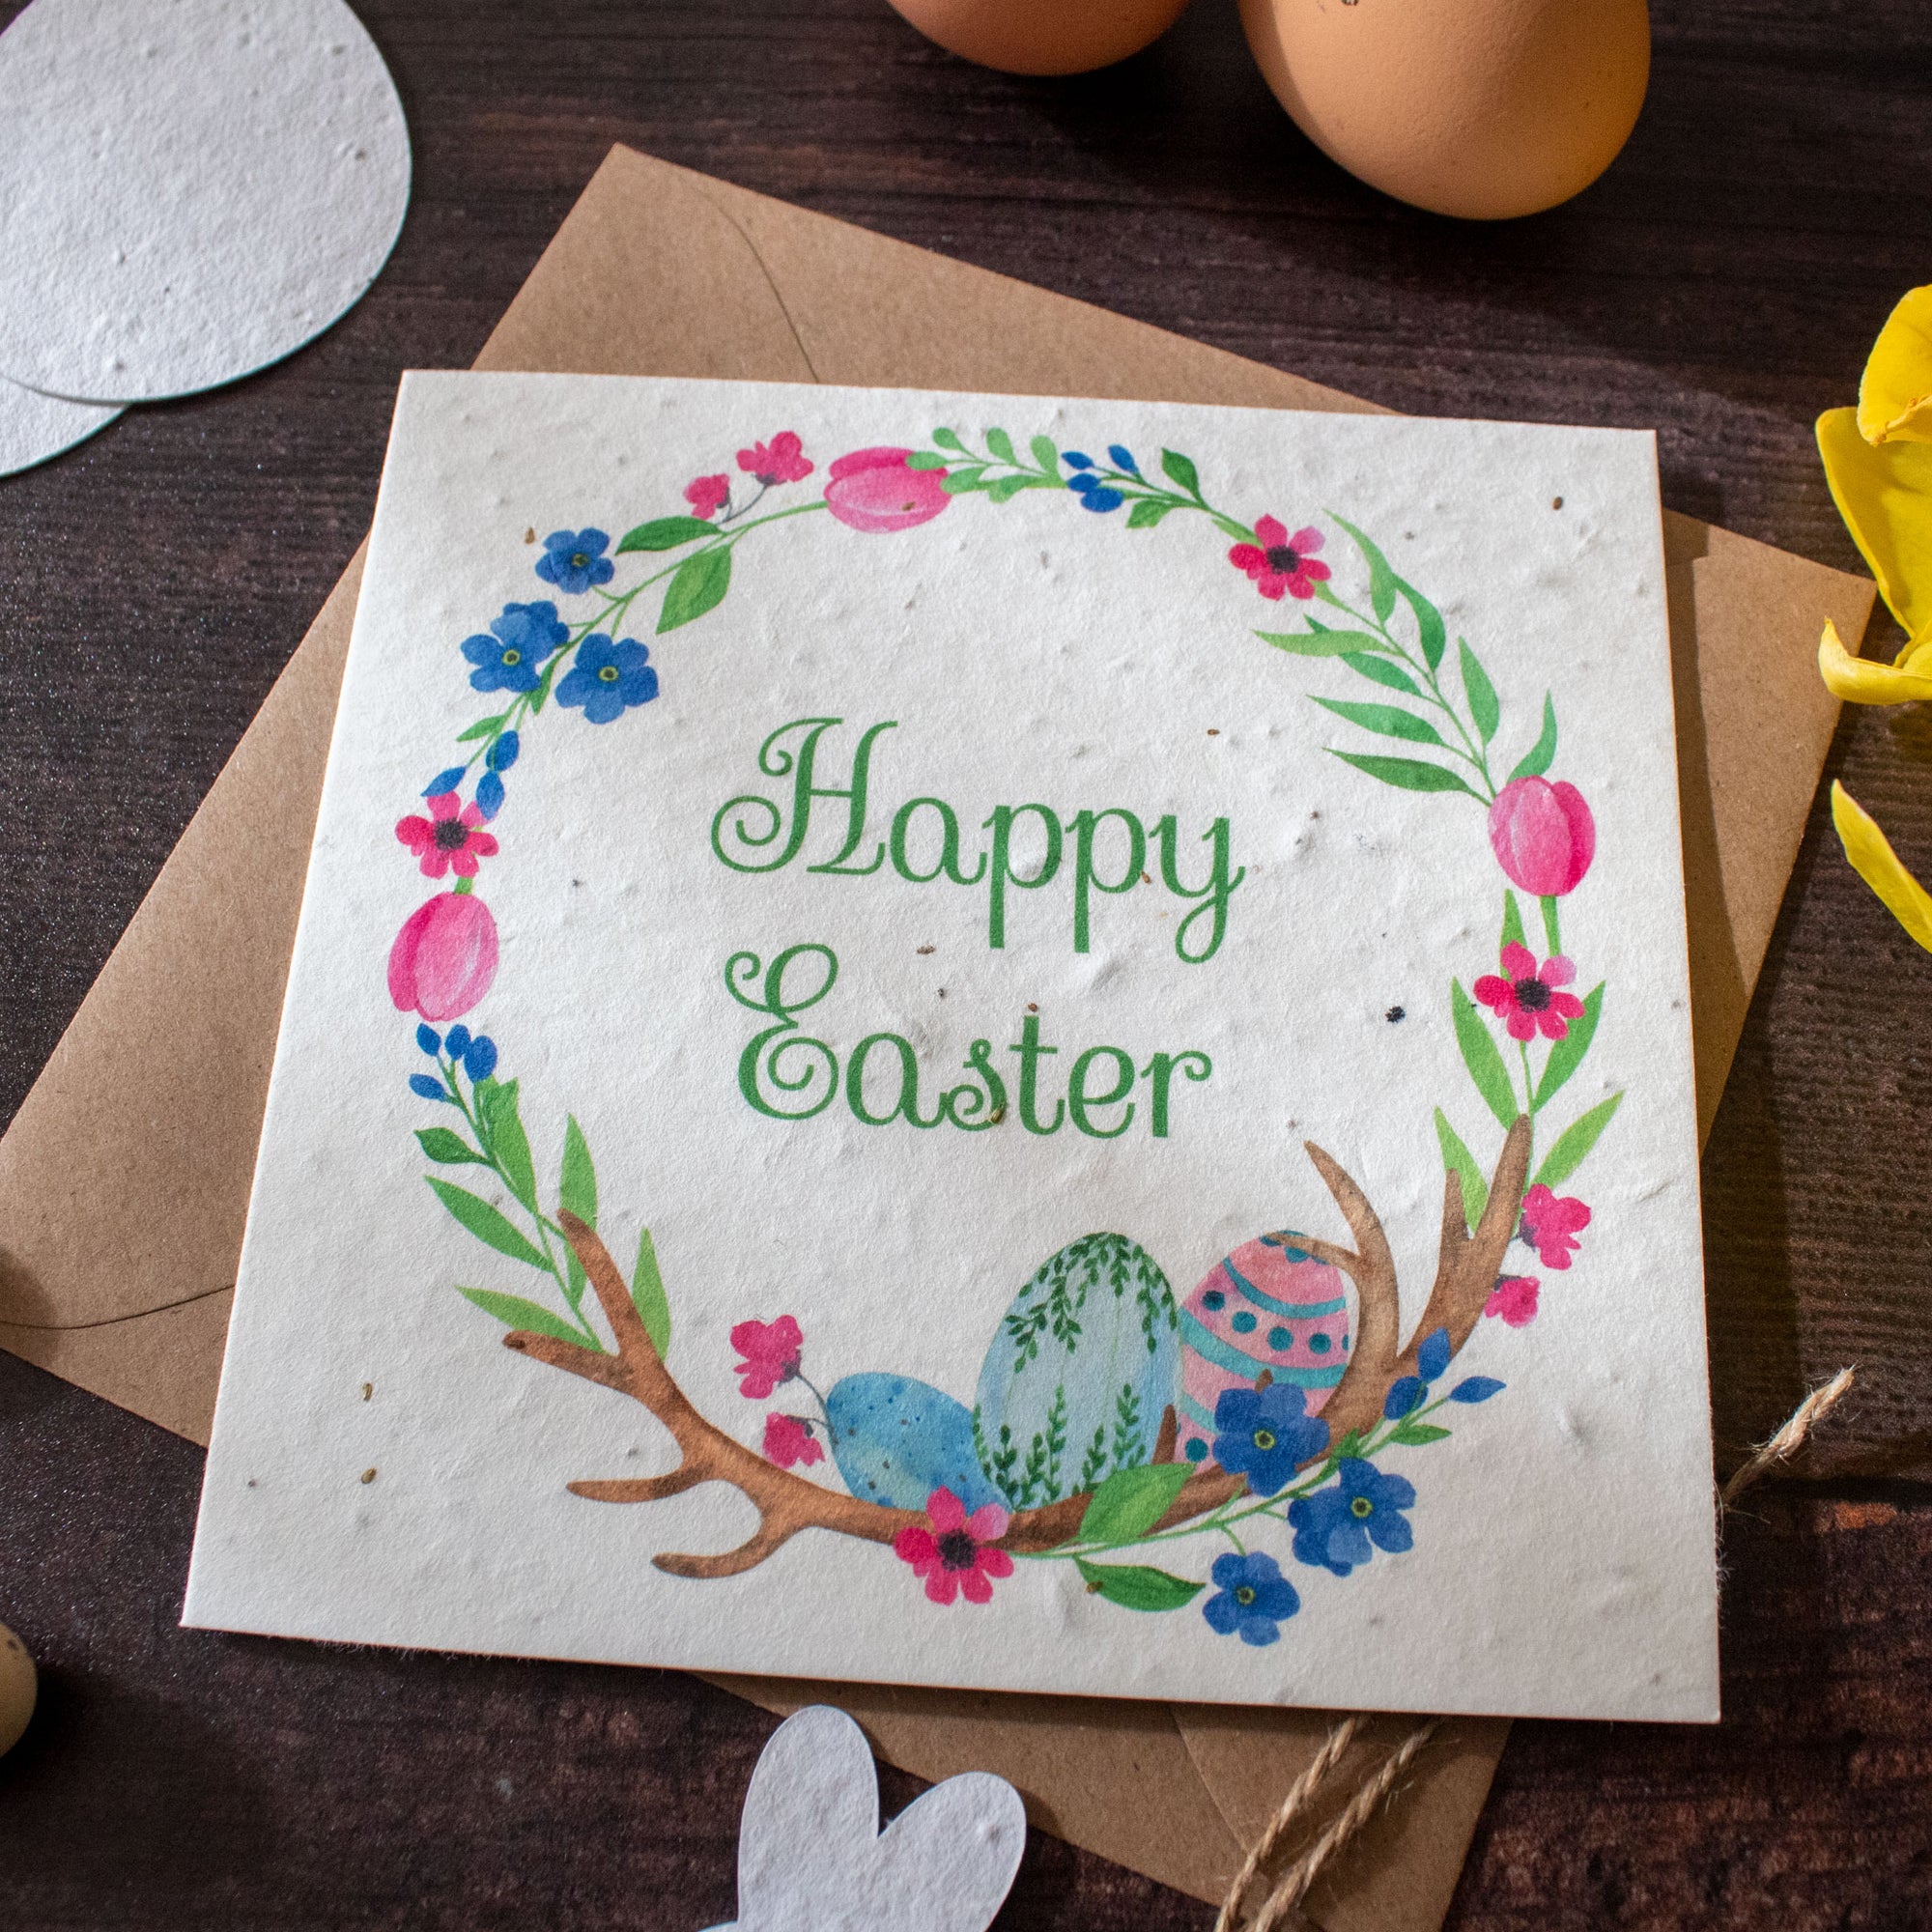 Plantable Easter Card - 'Happy Easter' Wreath | Greetings Card - The Naughty Shrew